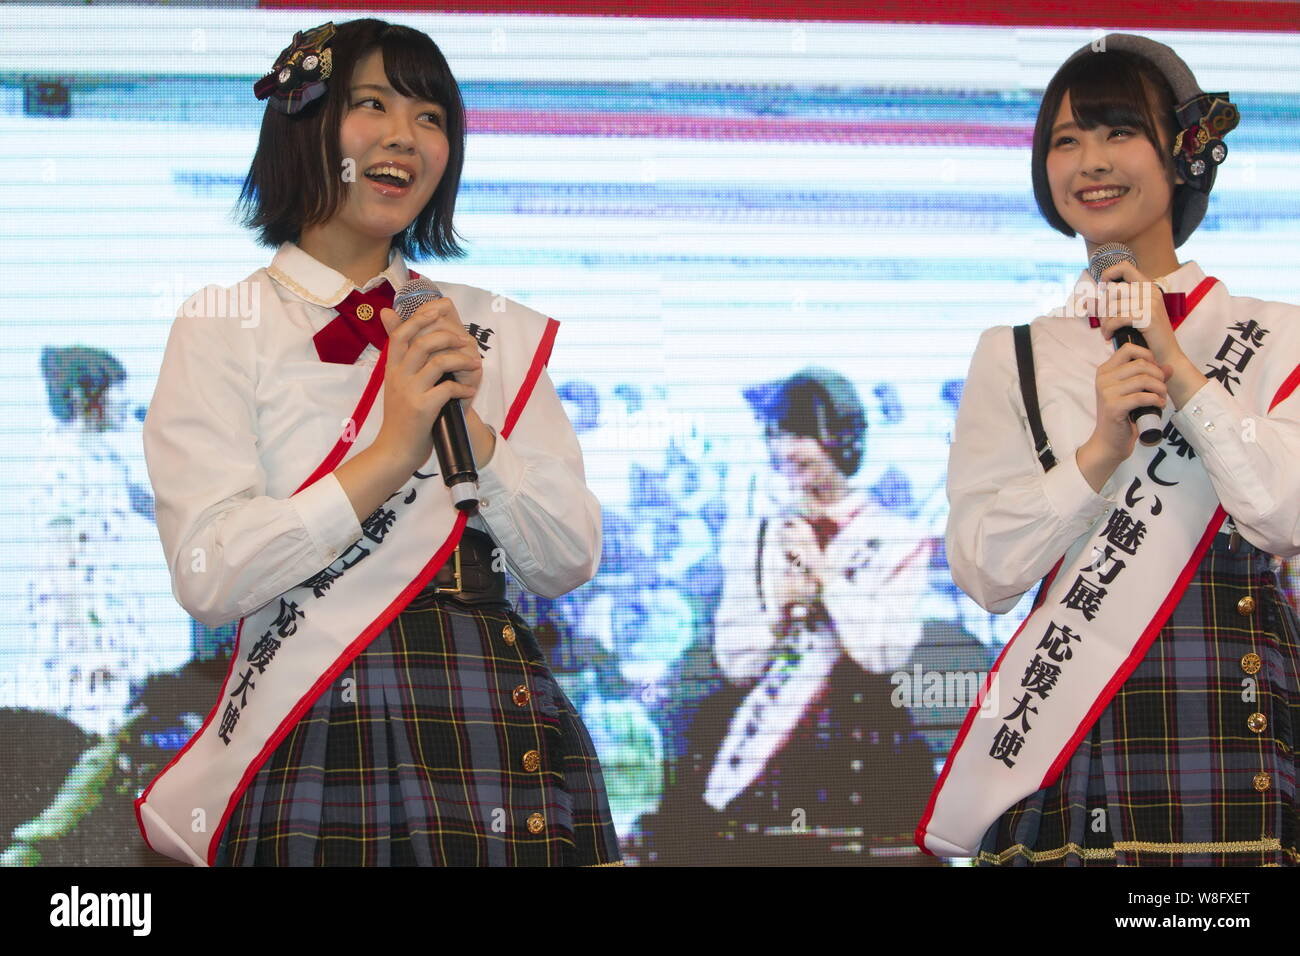 Maria Shimizu, left, and Shiori Sato of the Team 8 of Japanese idol gril group AKB48 attend a promotional event for Japanese food during the HKTDC Foo Stock Photo